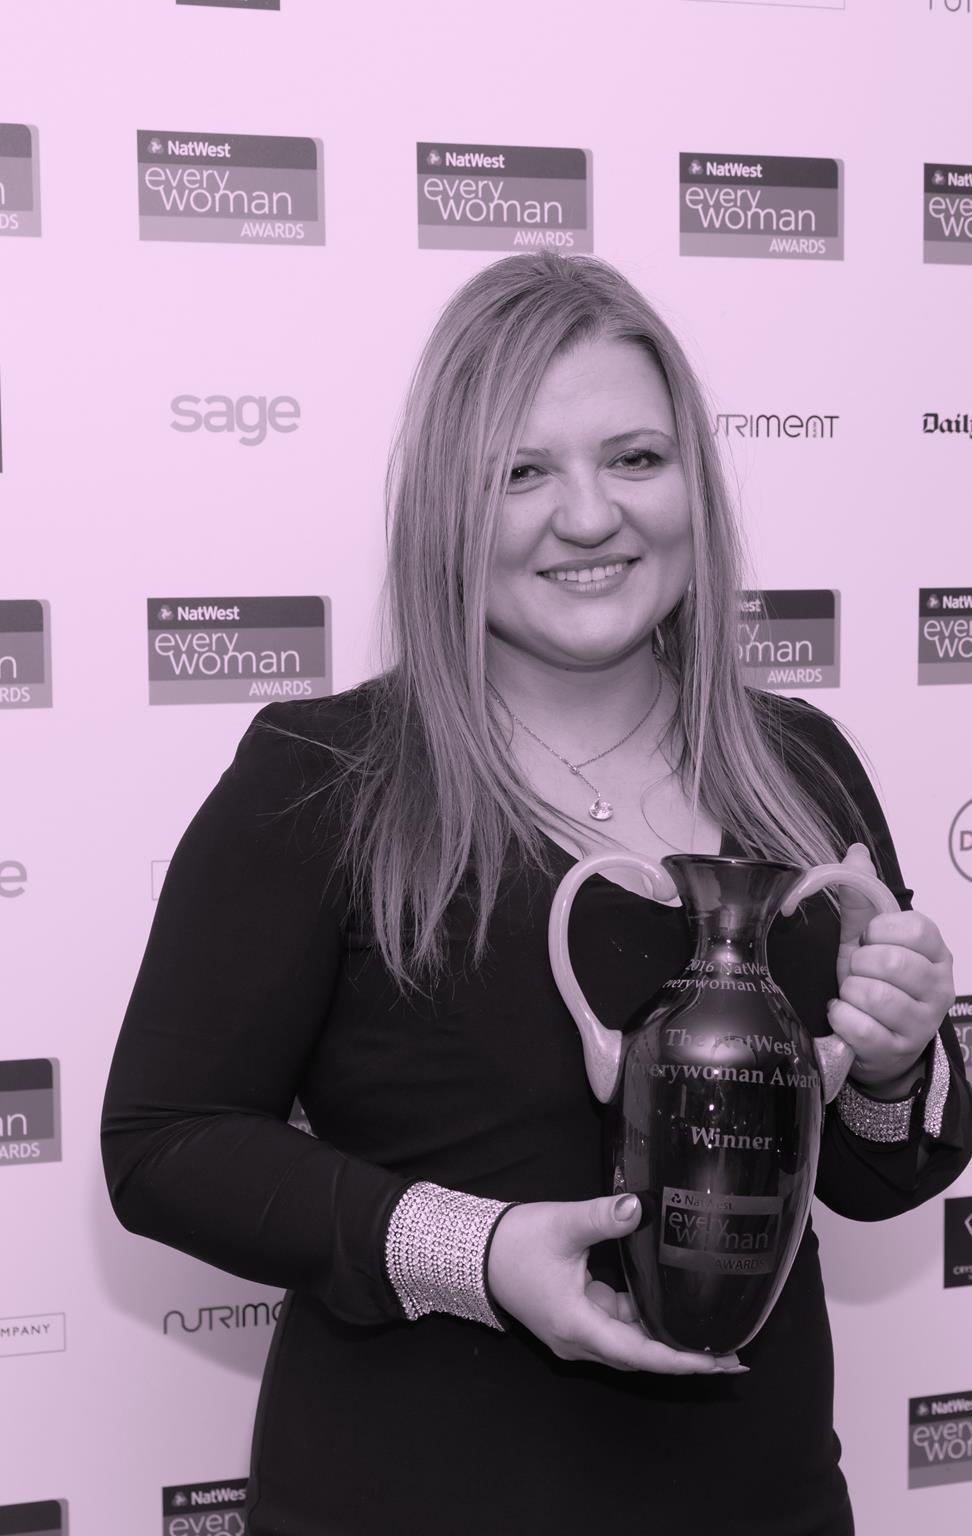 THE BENEFITS Winning the NatWest everywoman Award has been a truly uplifting experience for myself and my Dekko Interiors team.